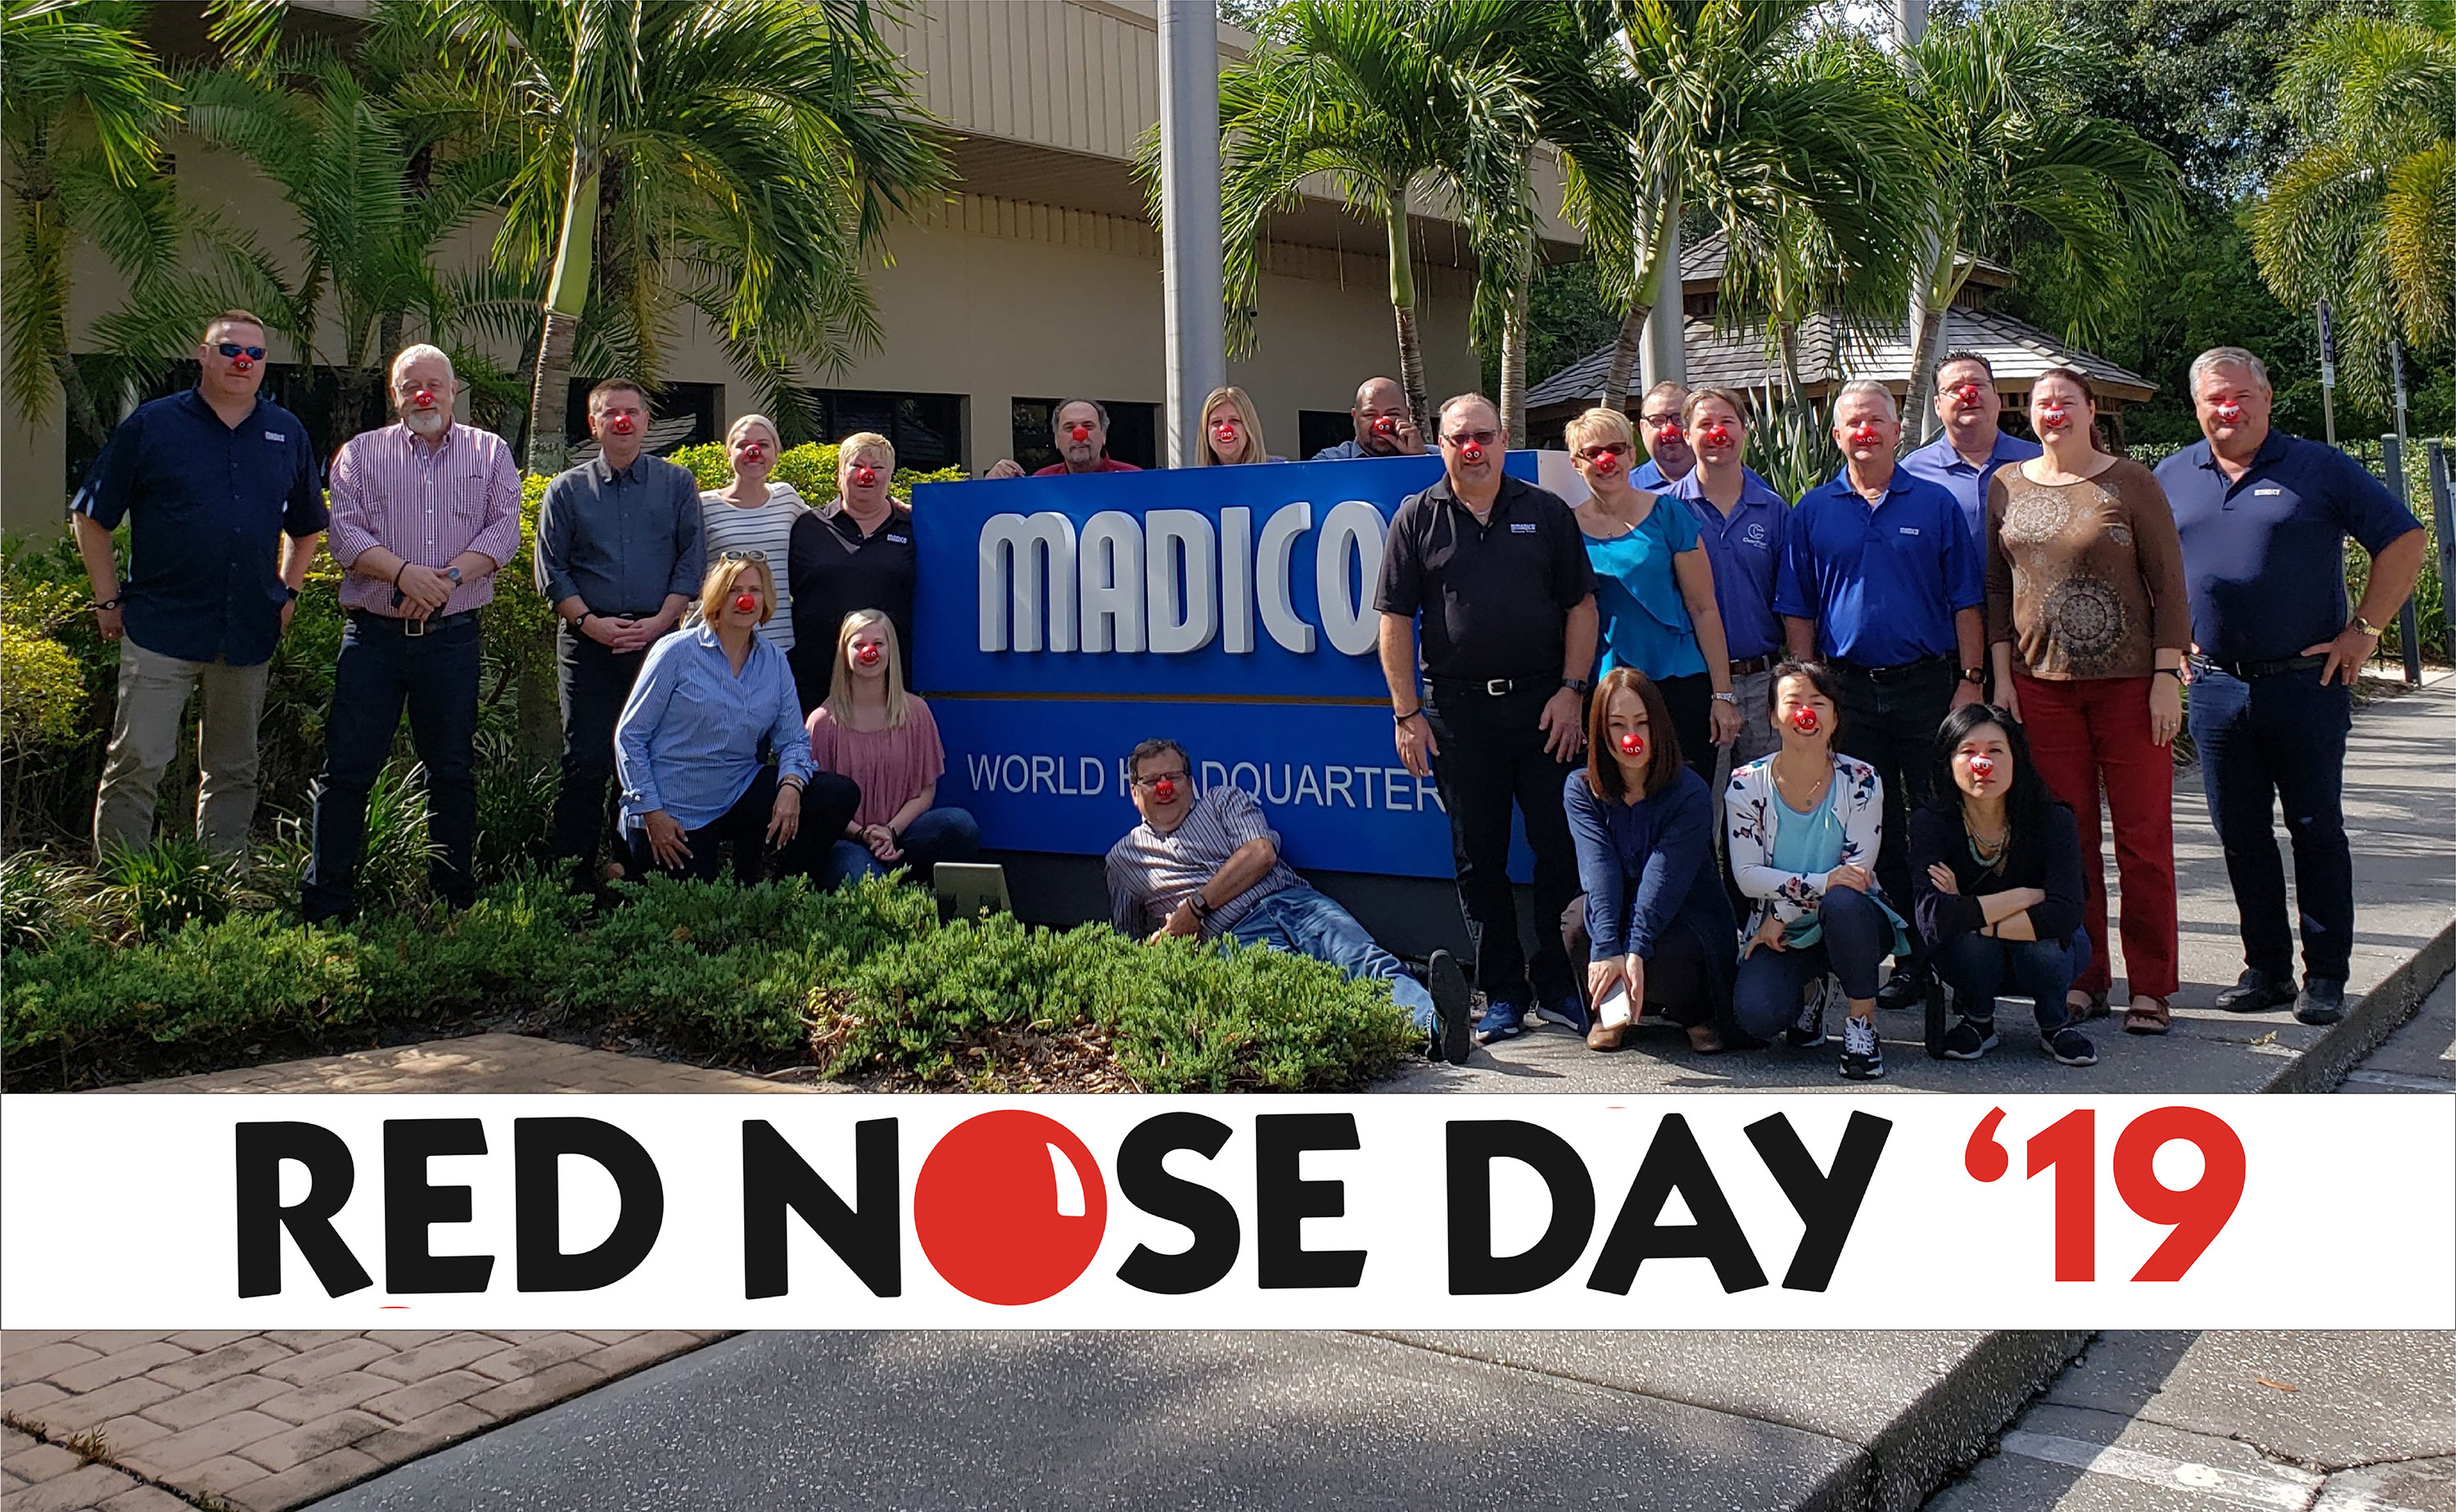 madico staff on red nose day